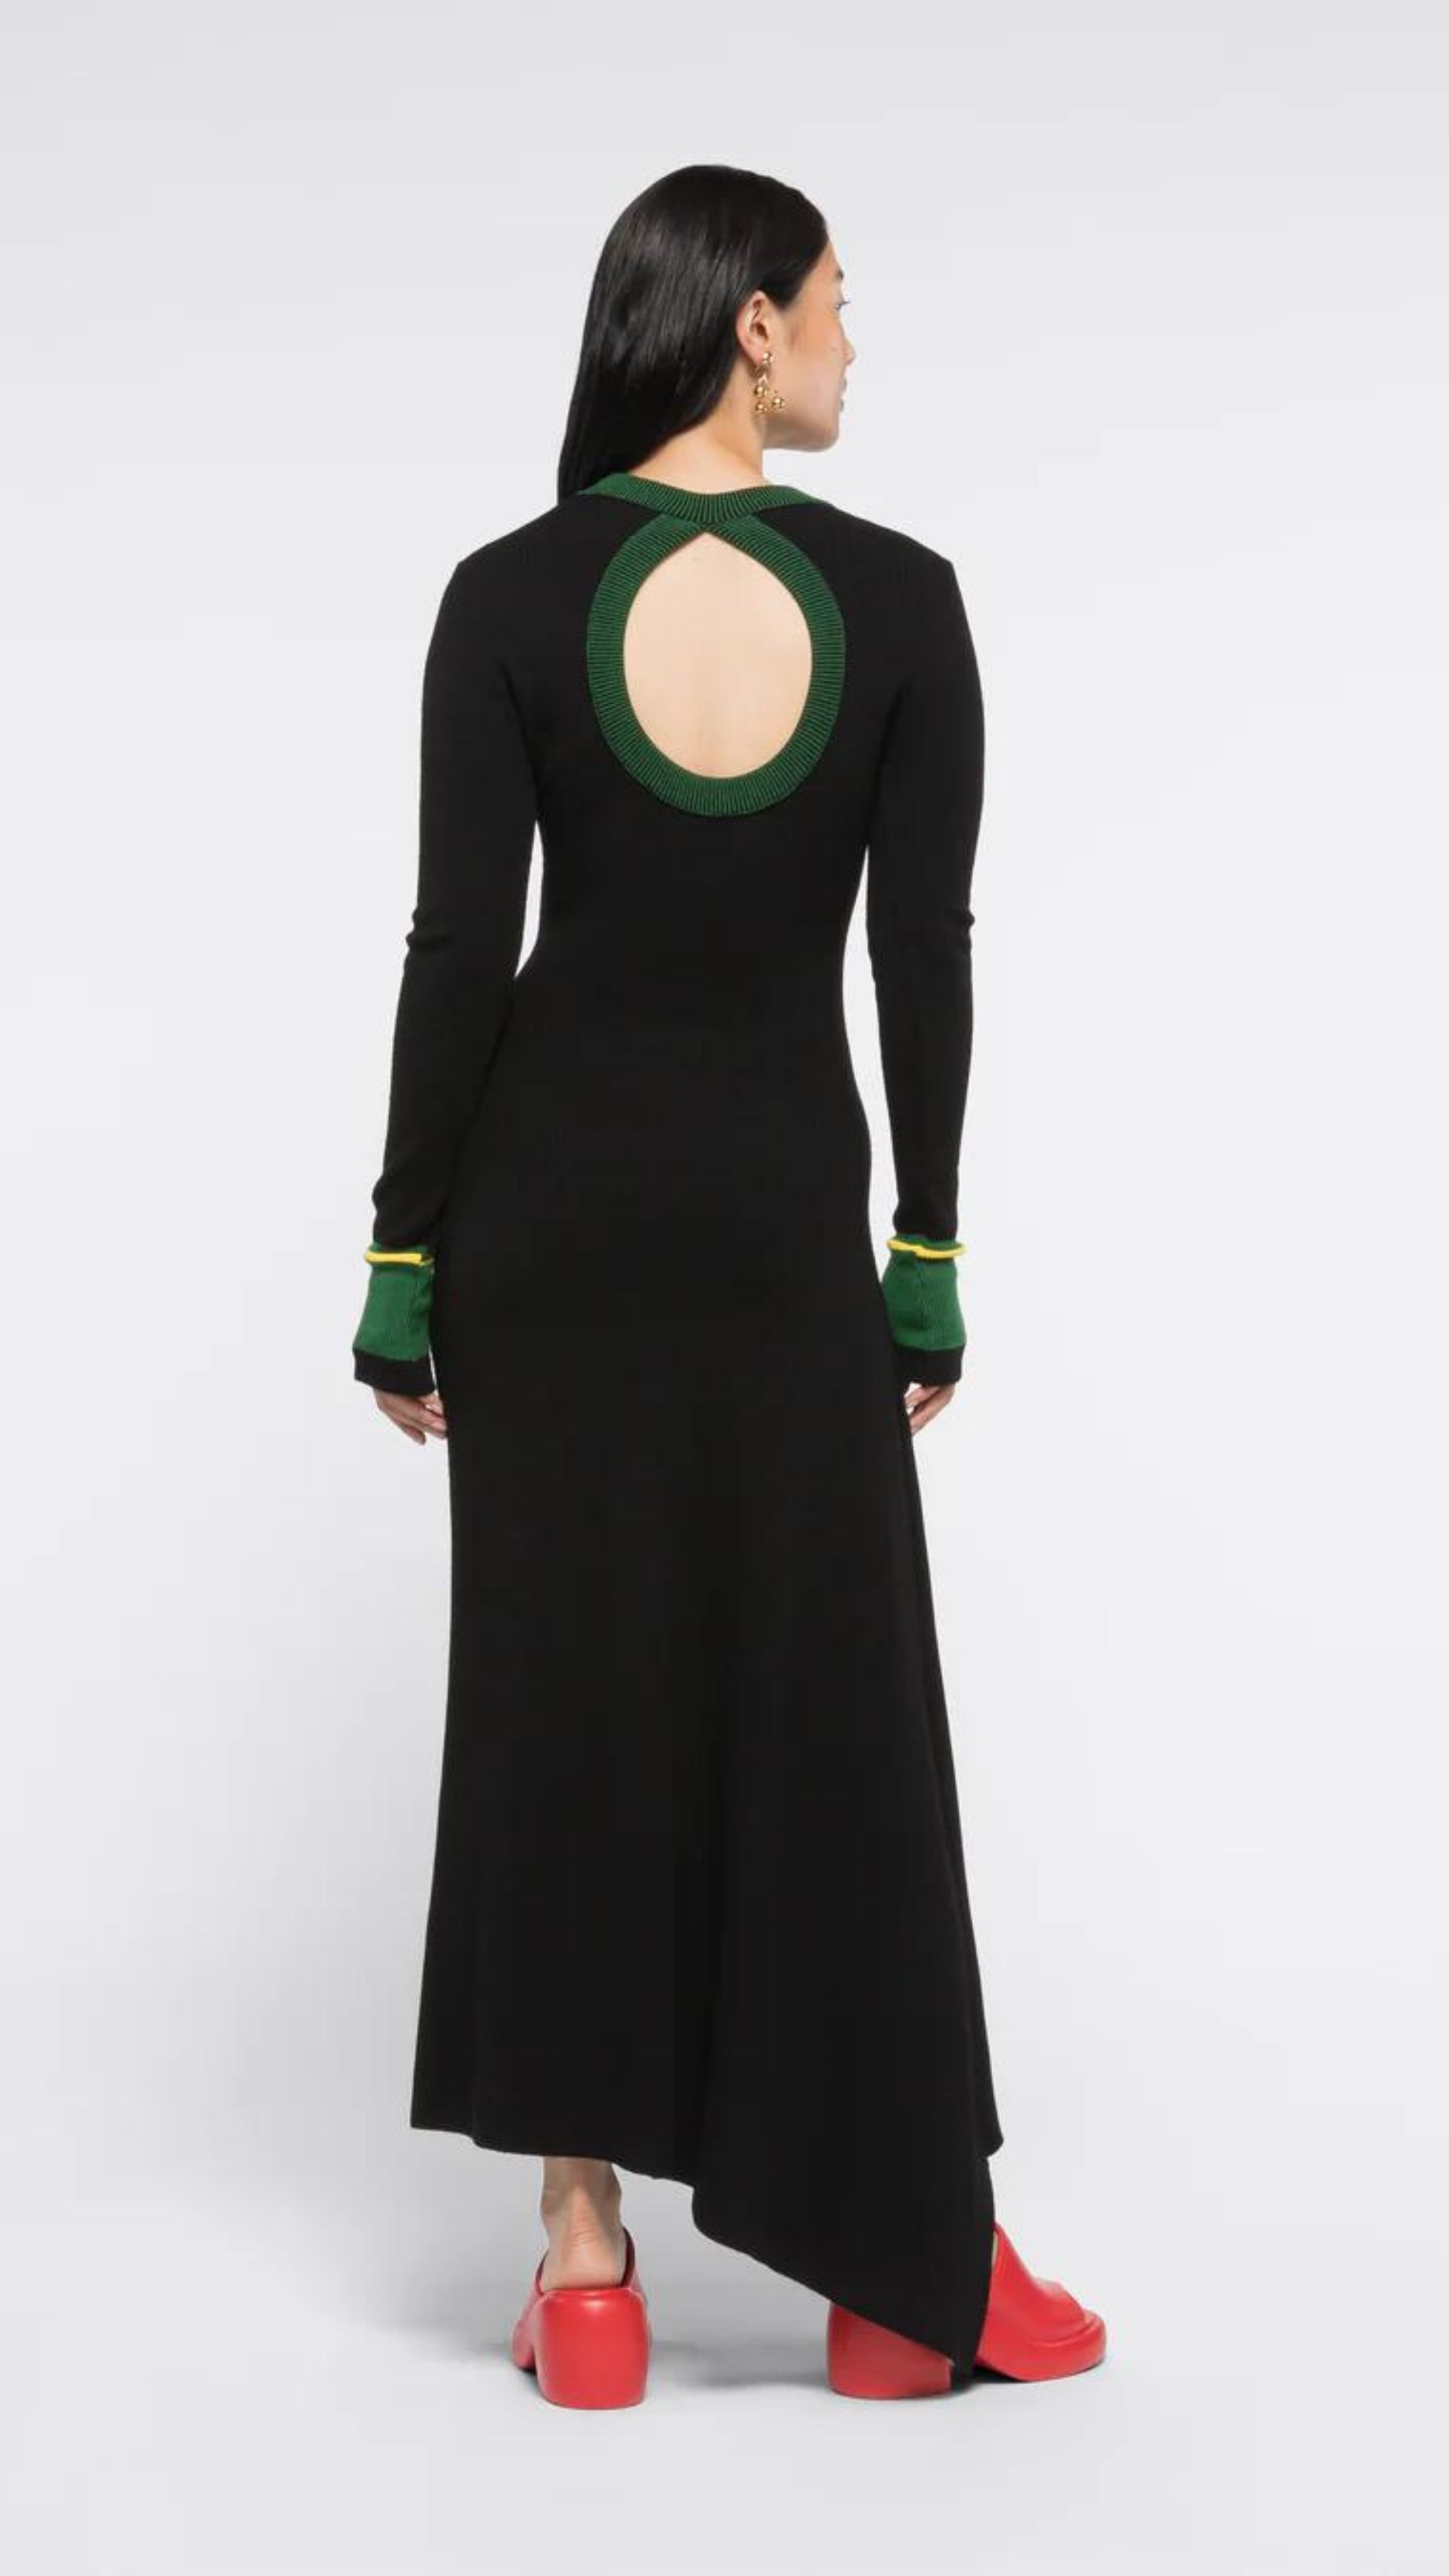 AZ Factory Colville Molly Molloy and Lucina Chambers Back Keyhole Asymmetrical Dress. Knit dress in black with a key hole cut out in the back. The neckline and the cuffs are rimmed in green and yellow. Asymmetrical long hem. Shown on model facing back.